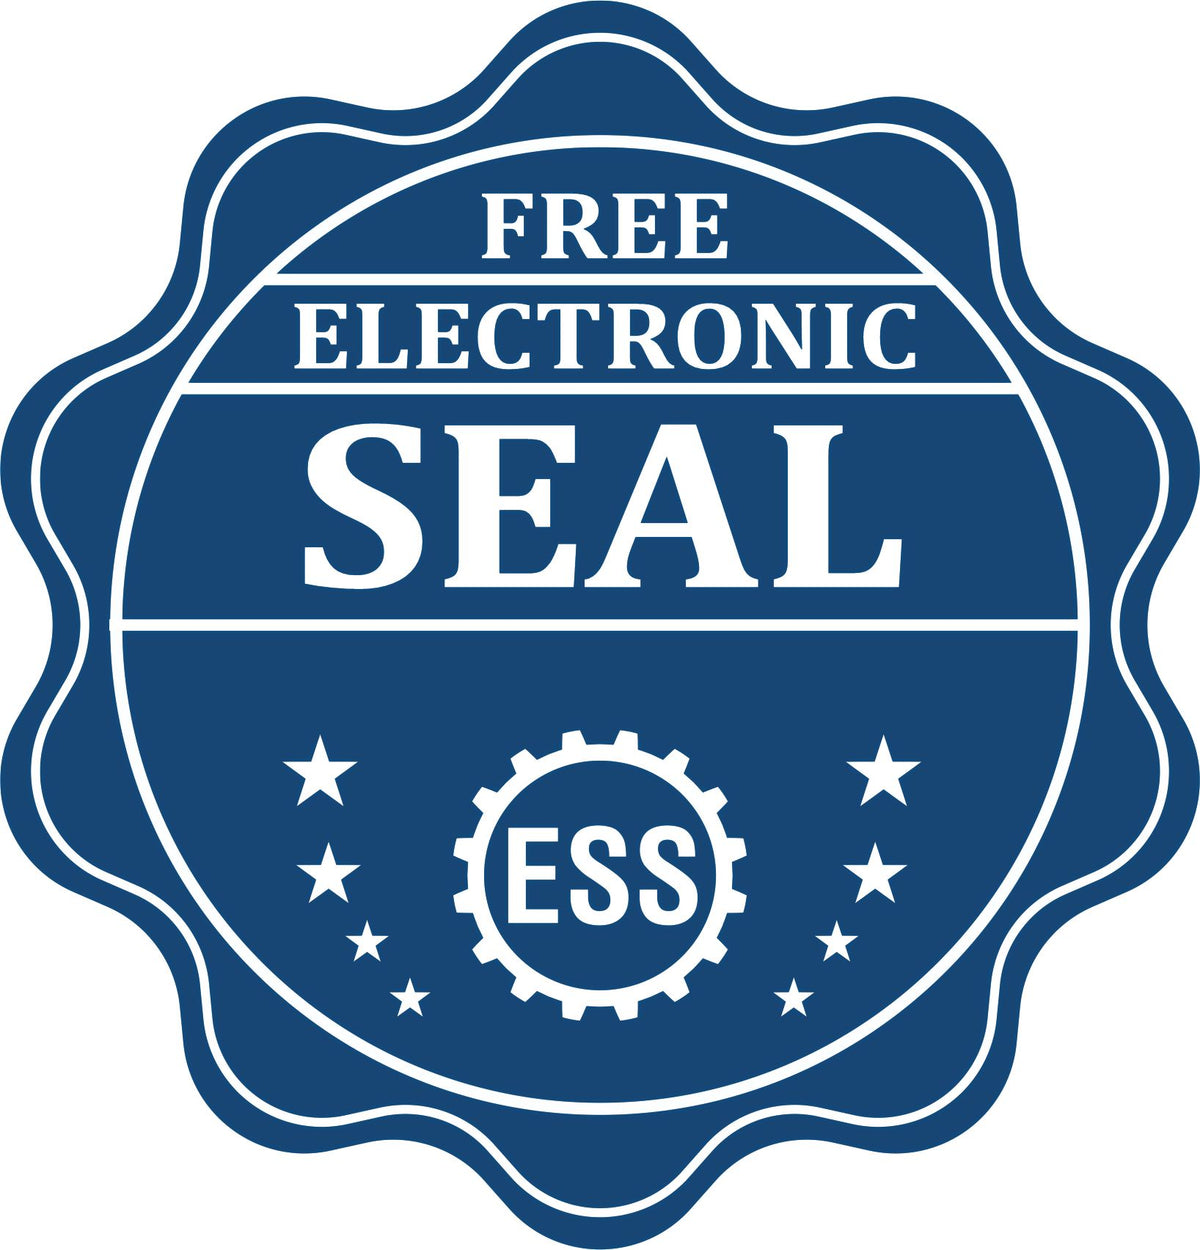 A badge showing a free electronic seal for the Soft New York Professional Engineer Seal with stars and the ESS gear on the emblem.